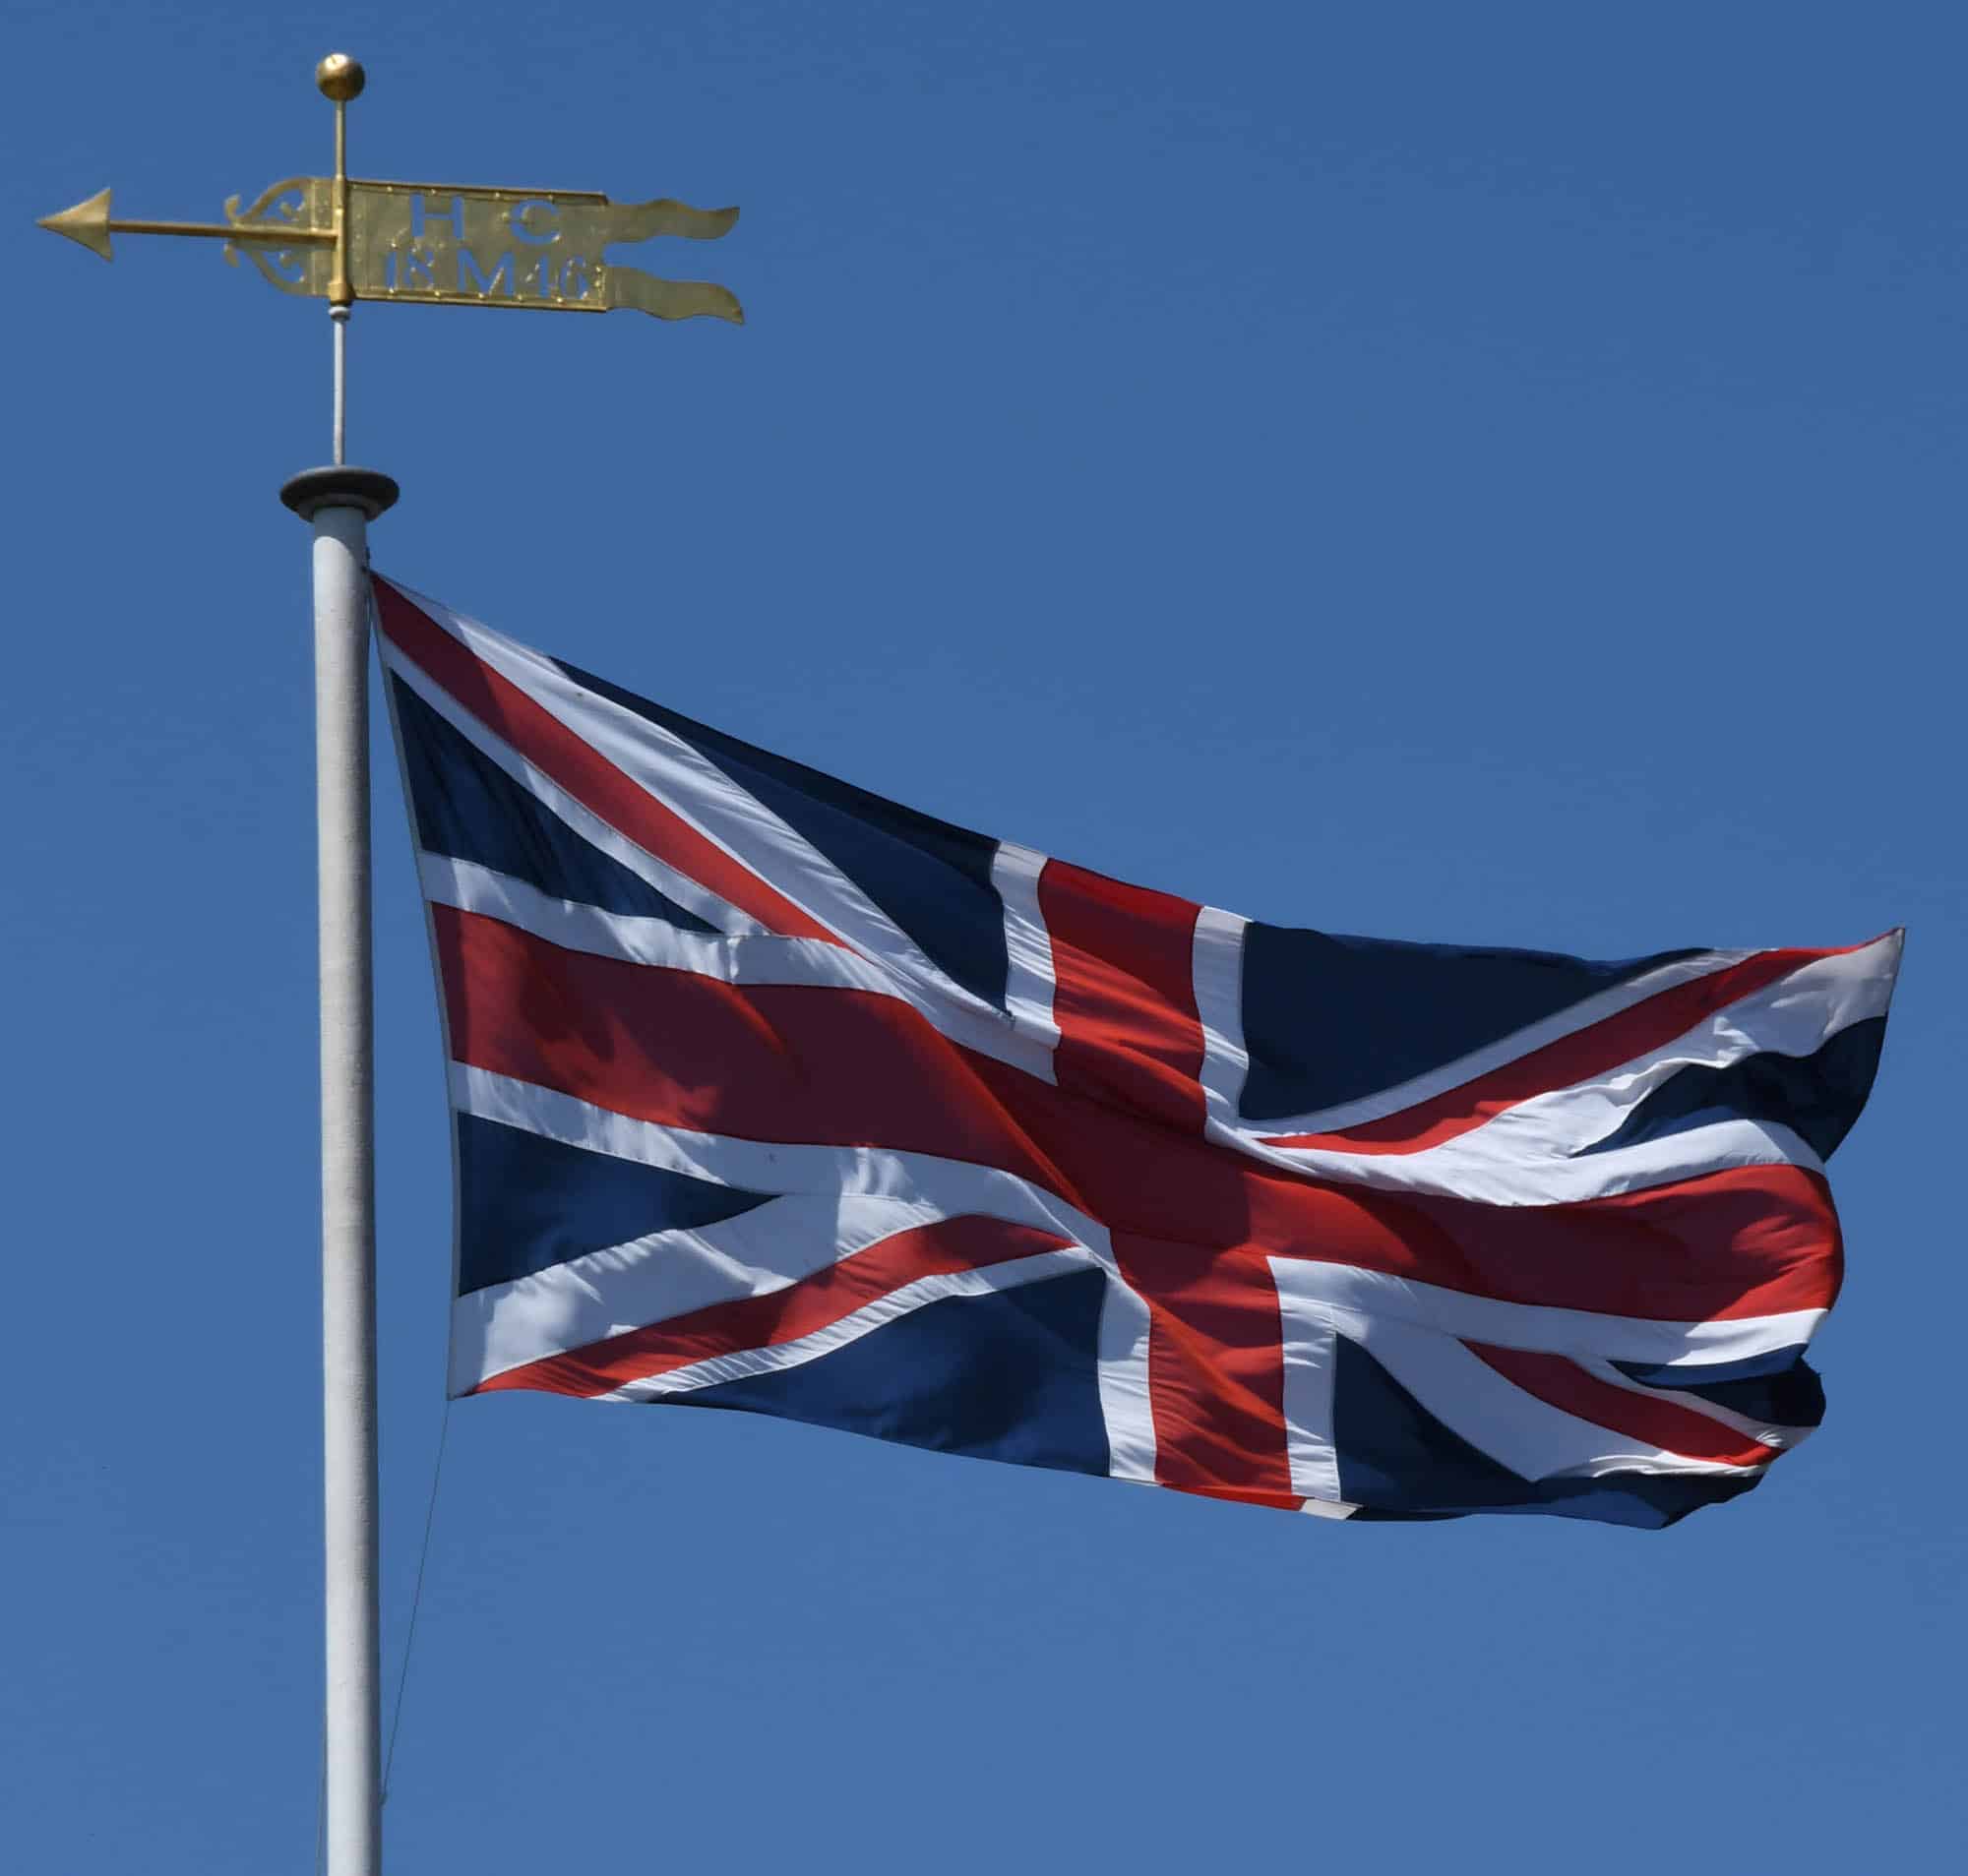 The UK flag, revered by the author of Noble